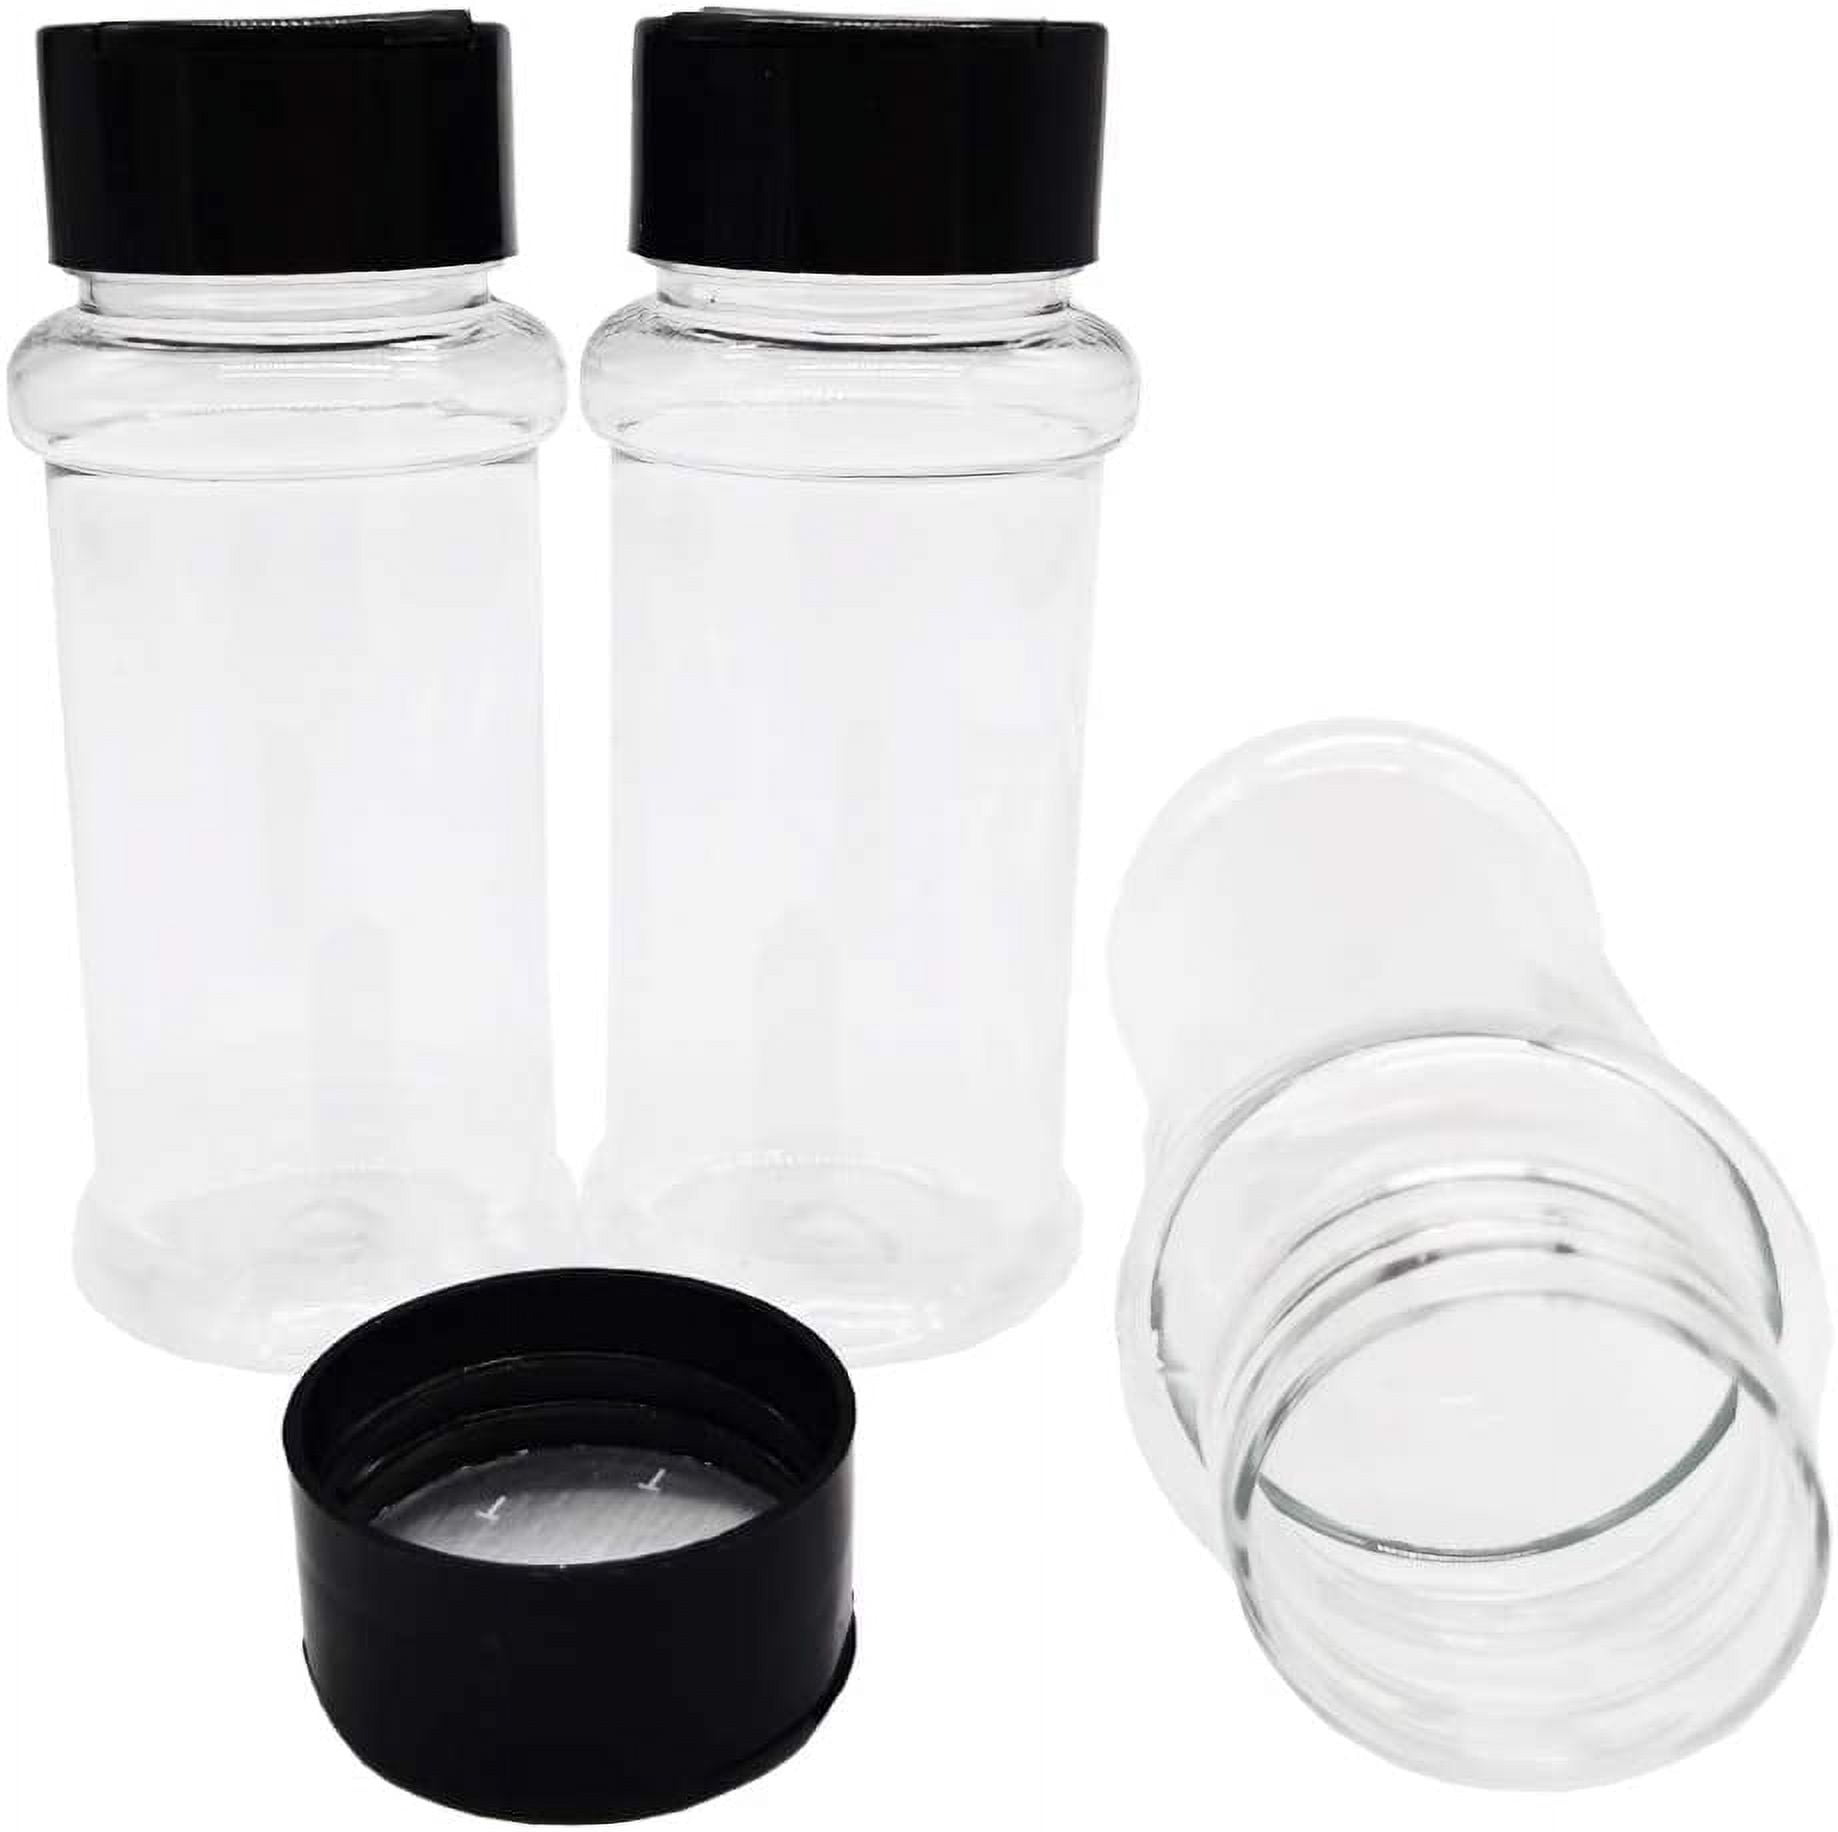 16 Pack 6 oz Glass Spice Jars with 80 Black Labels,180ml Empty